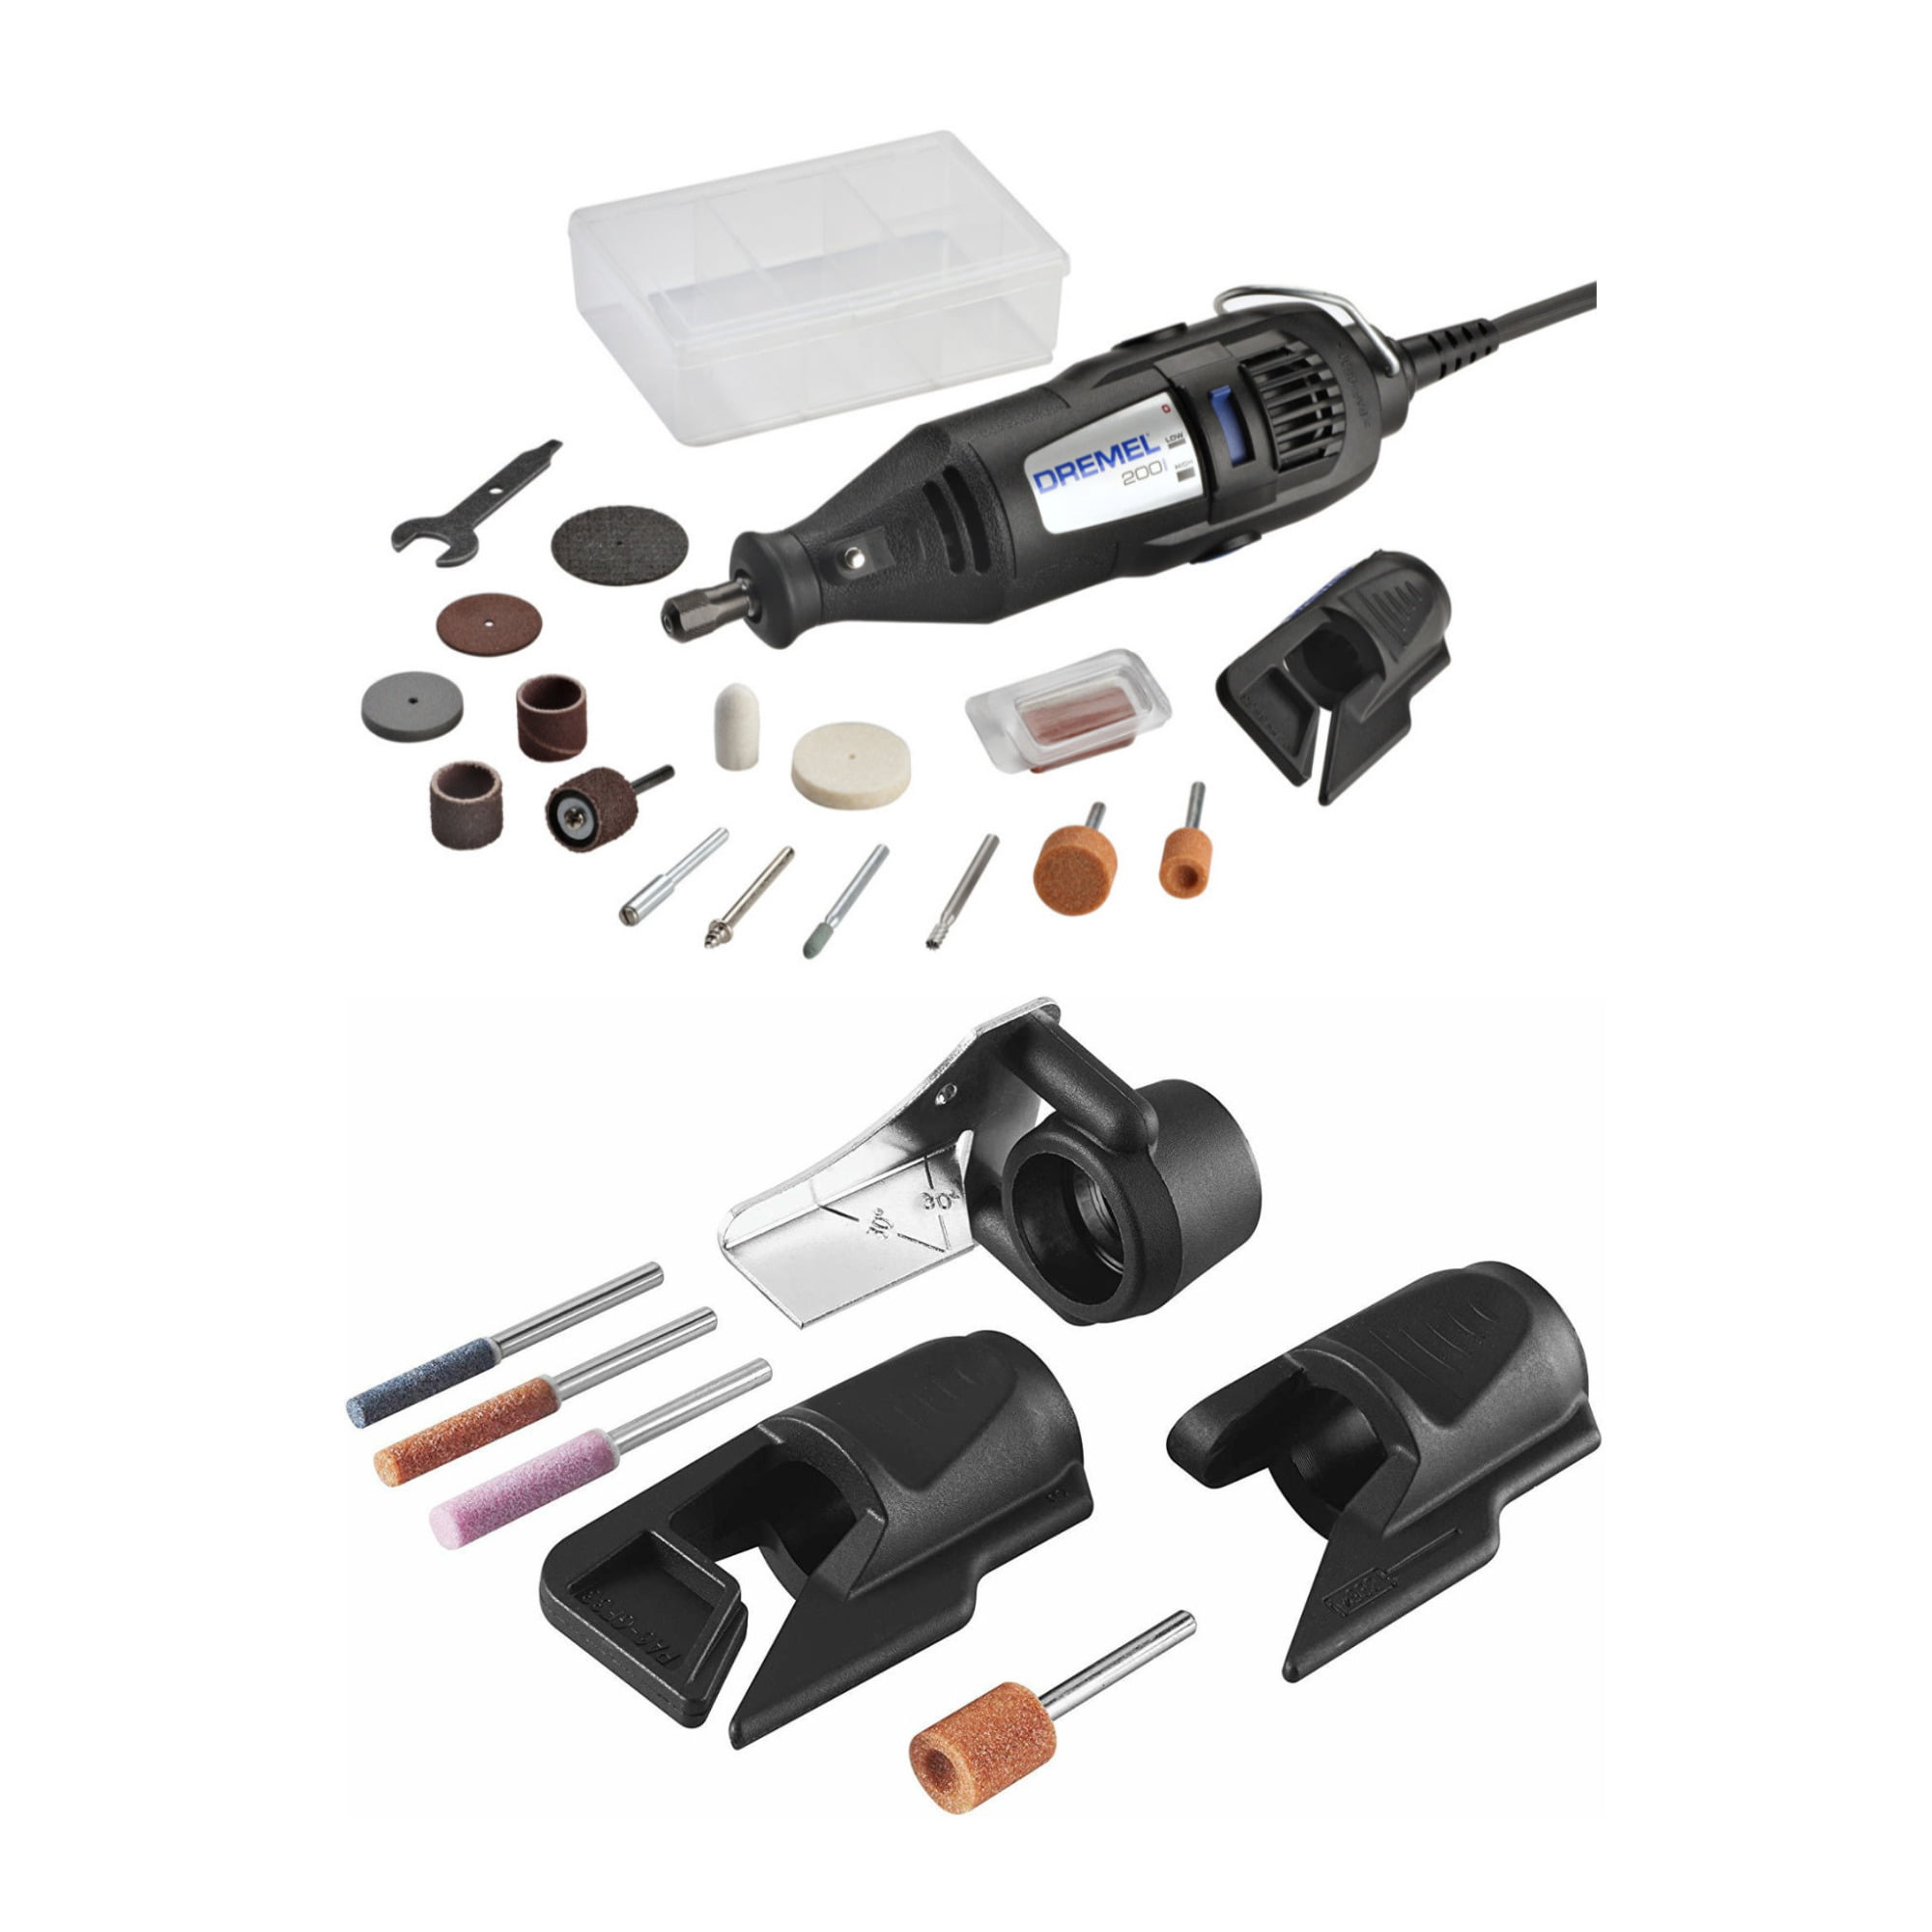 Dremel 200 1 15 Two Speed Rotary Tool Kit And Sharpening Kit For